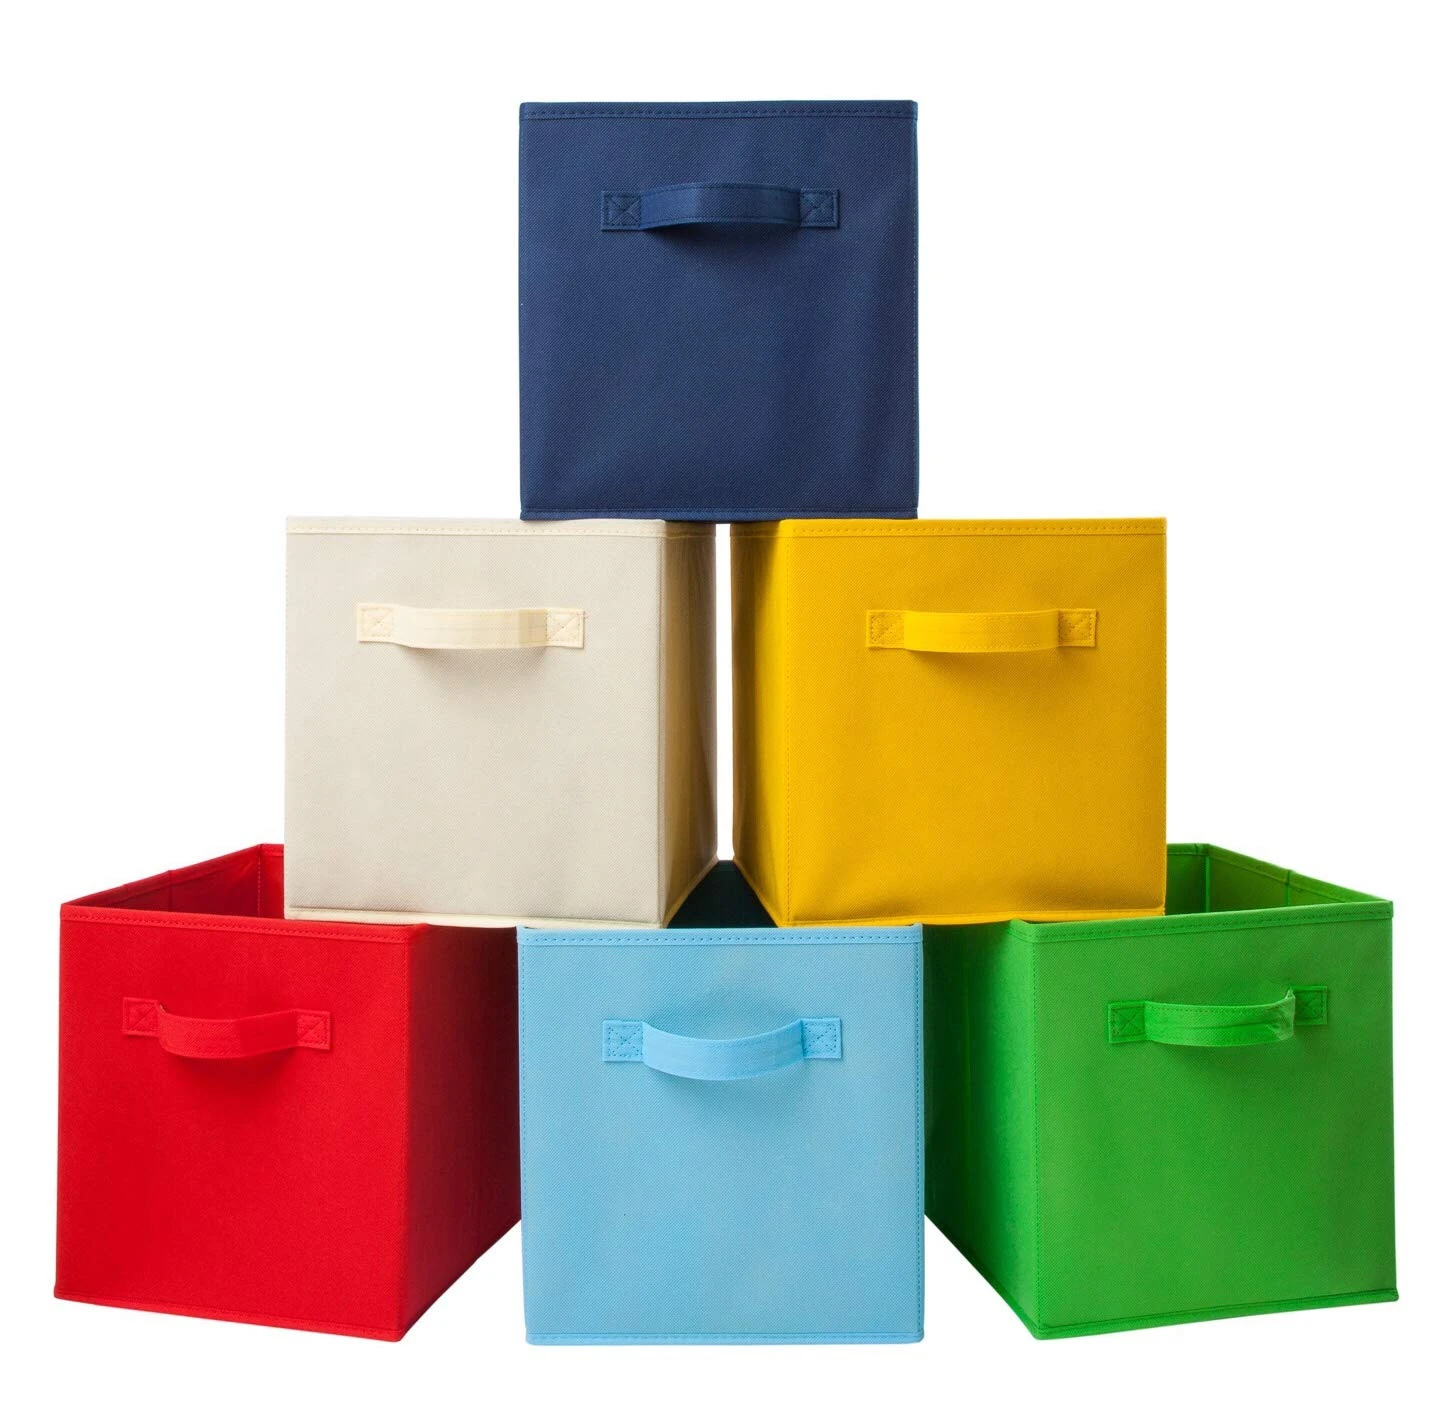 Hot Sale Collapsible Foldable Fabric Cloth Storage Cube With Handles